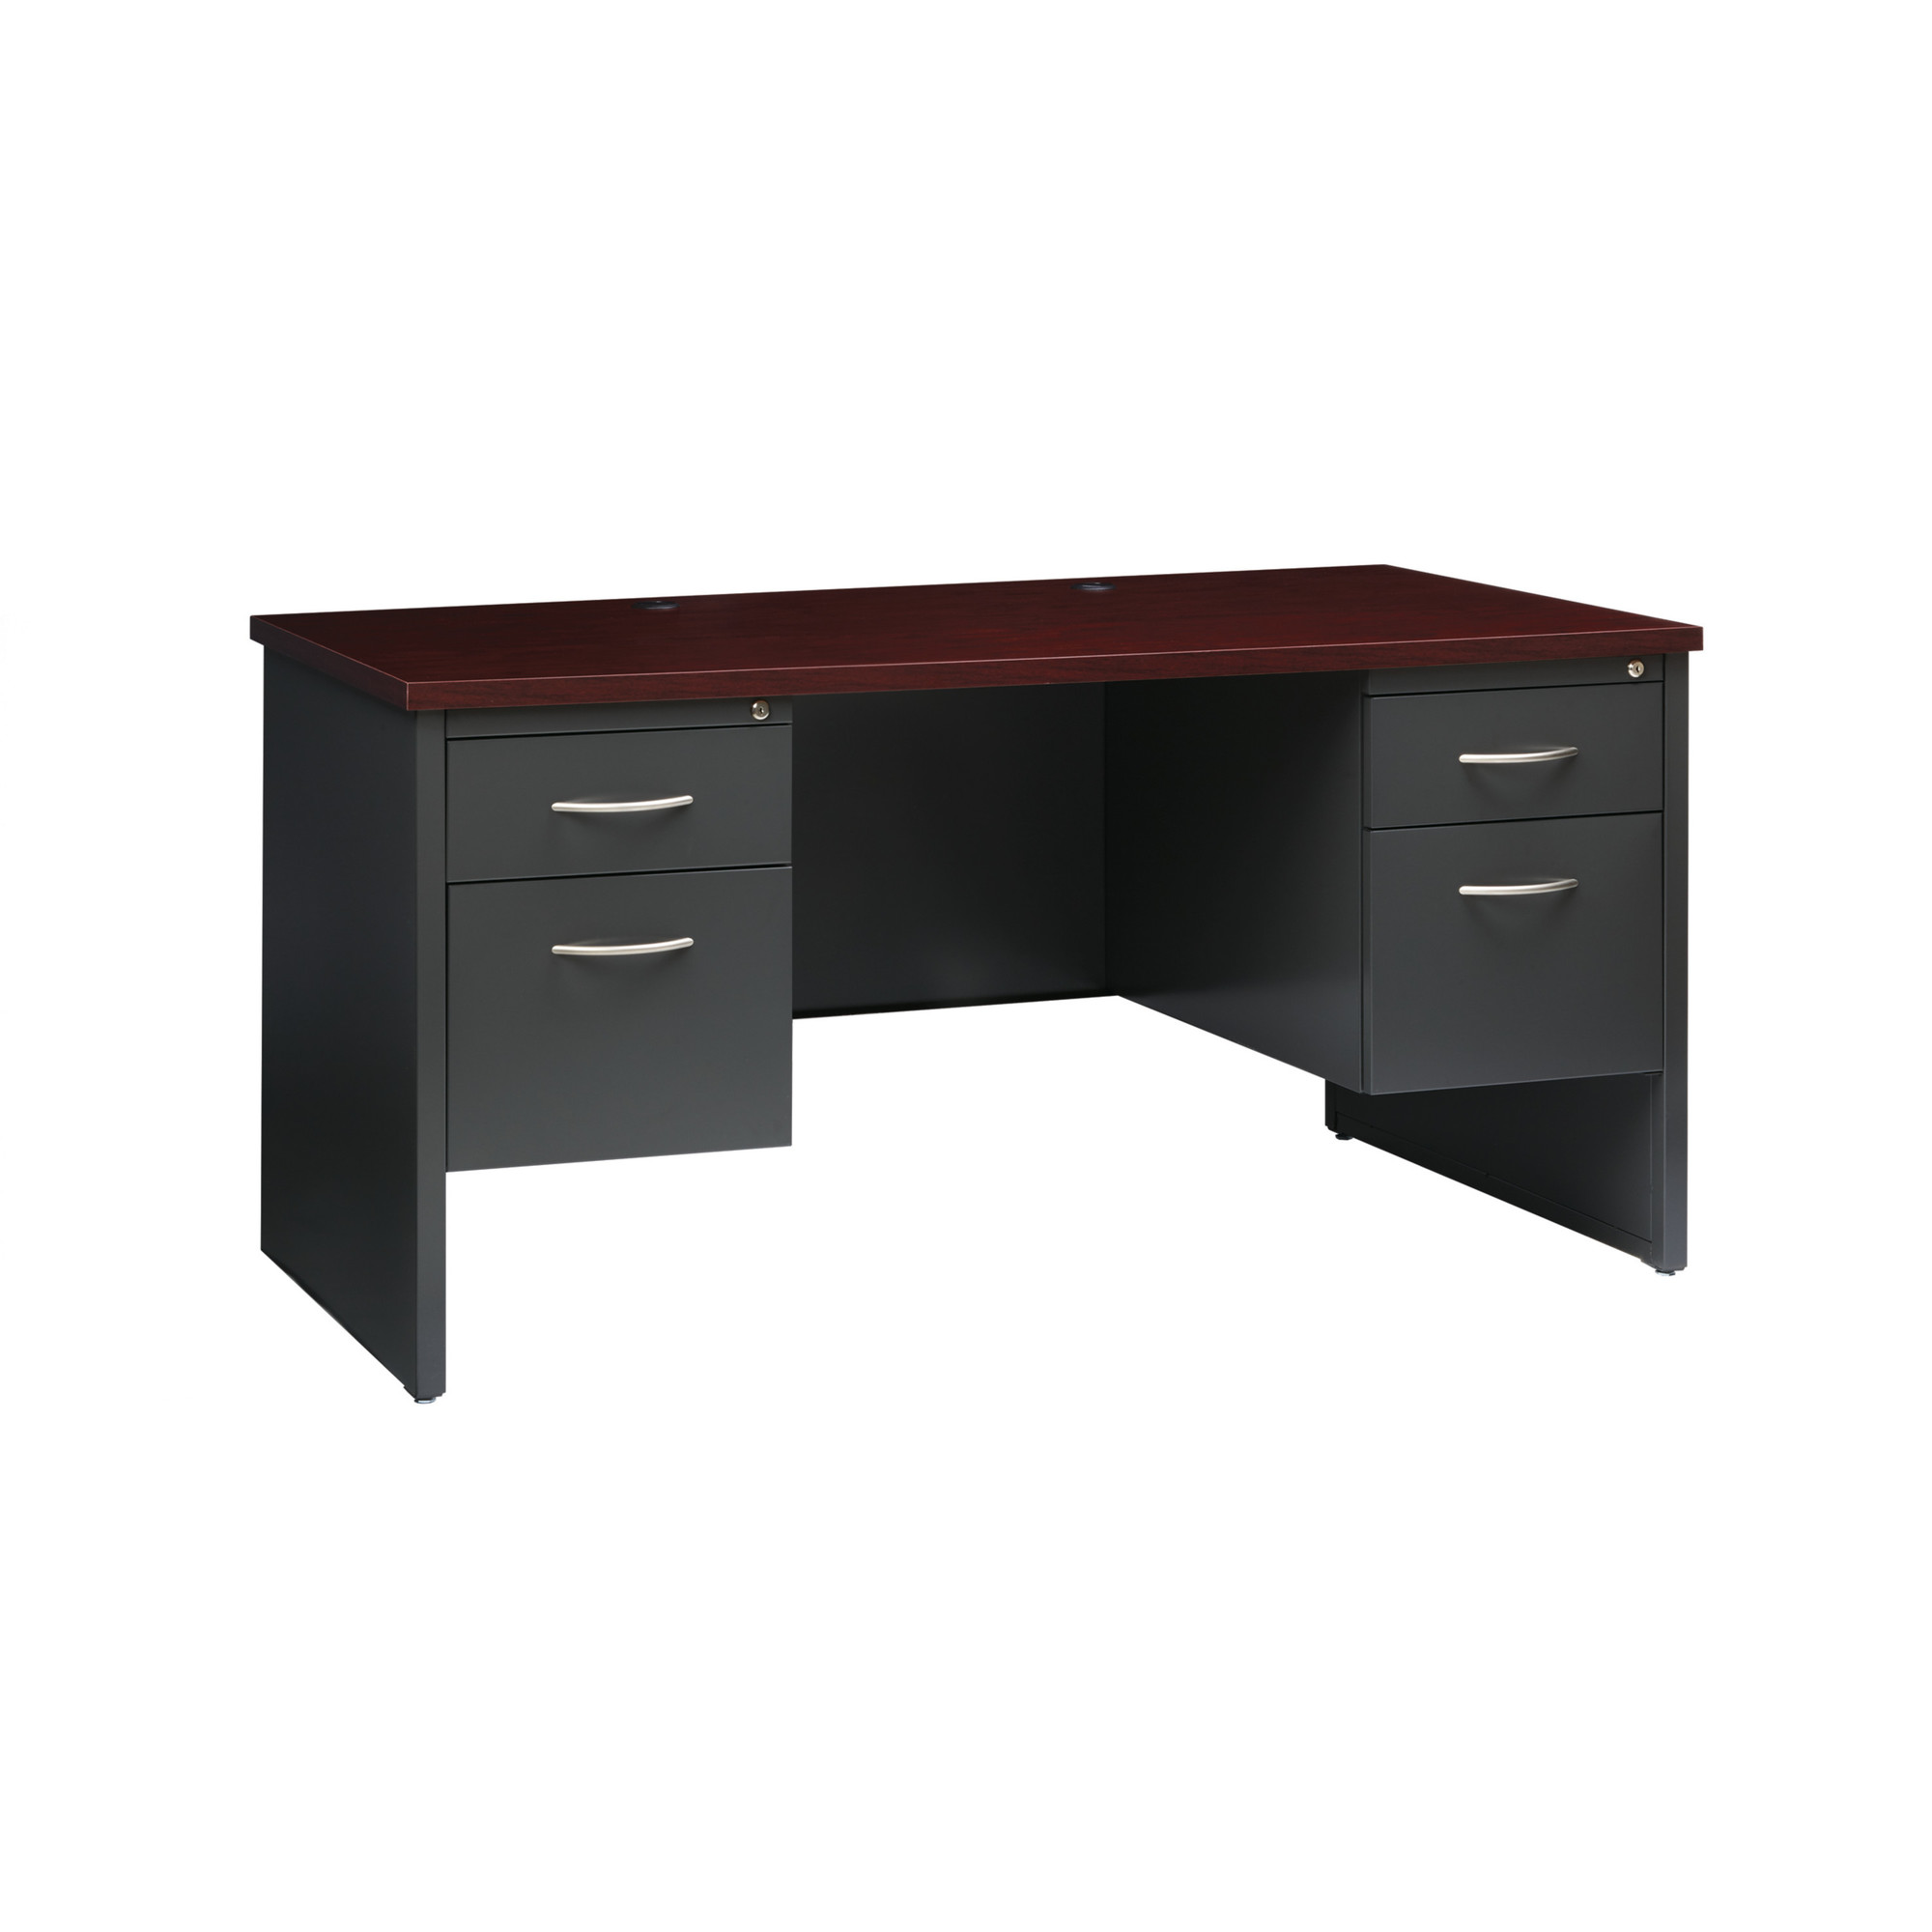 Executive Modular Double Ped File Office Desk, Width 60 in, Height 29.5 in, Depth 30 in, Model - Hirsh Industries 20534